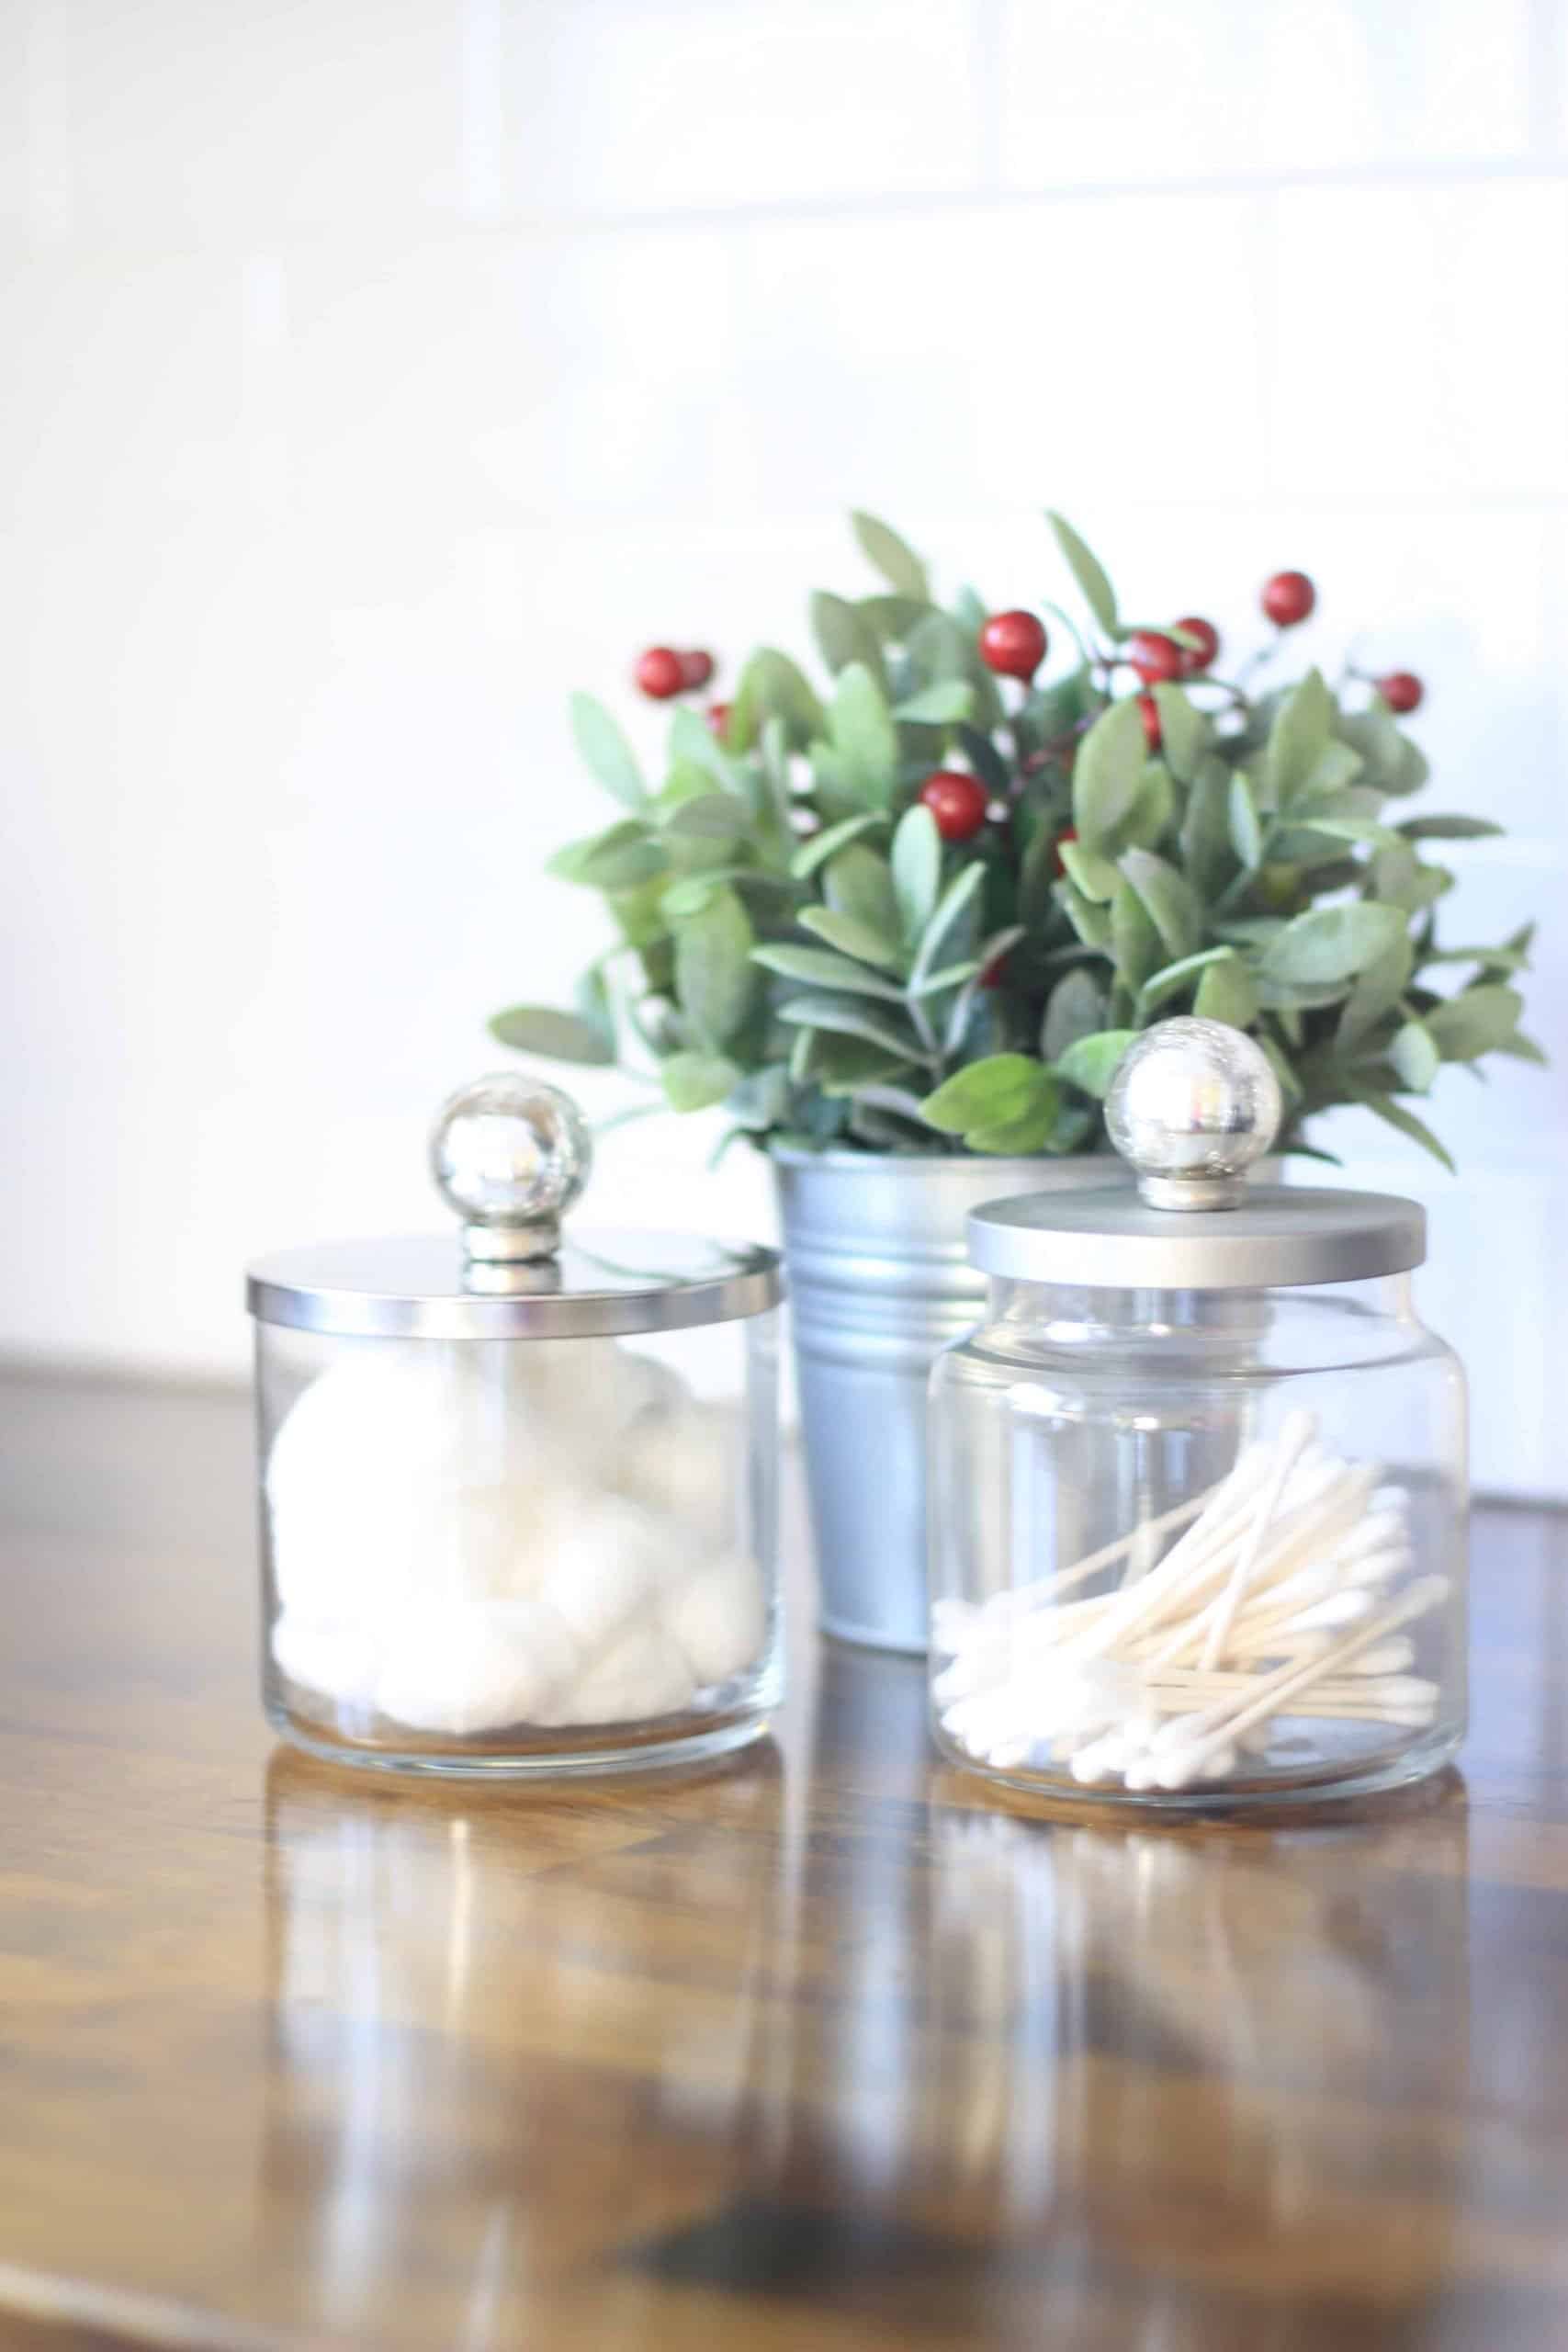 Rustic bathroom containers for every day bathroom items such as q tips, cotton balls and other toiletries. 